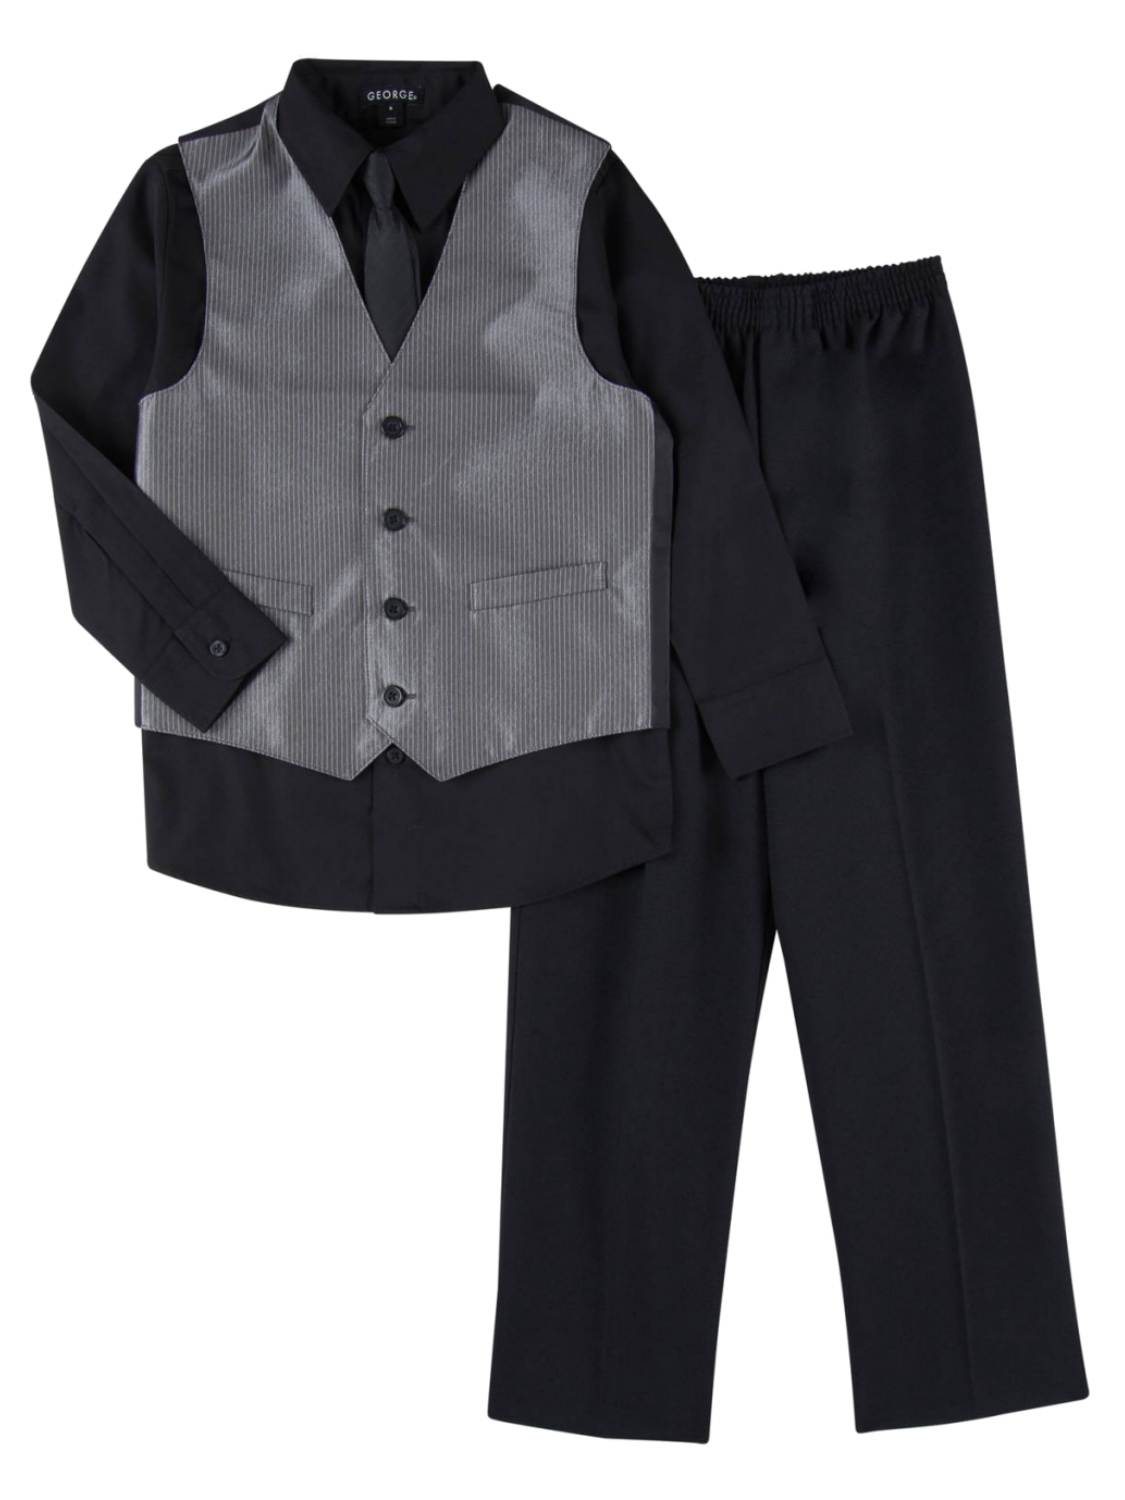 GEORGE Boys 4 Piece Suit Silver & Black Pin Stripe Dress Up Holiday Outfit Vest & Tie 4